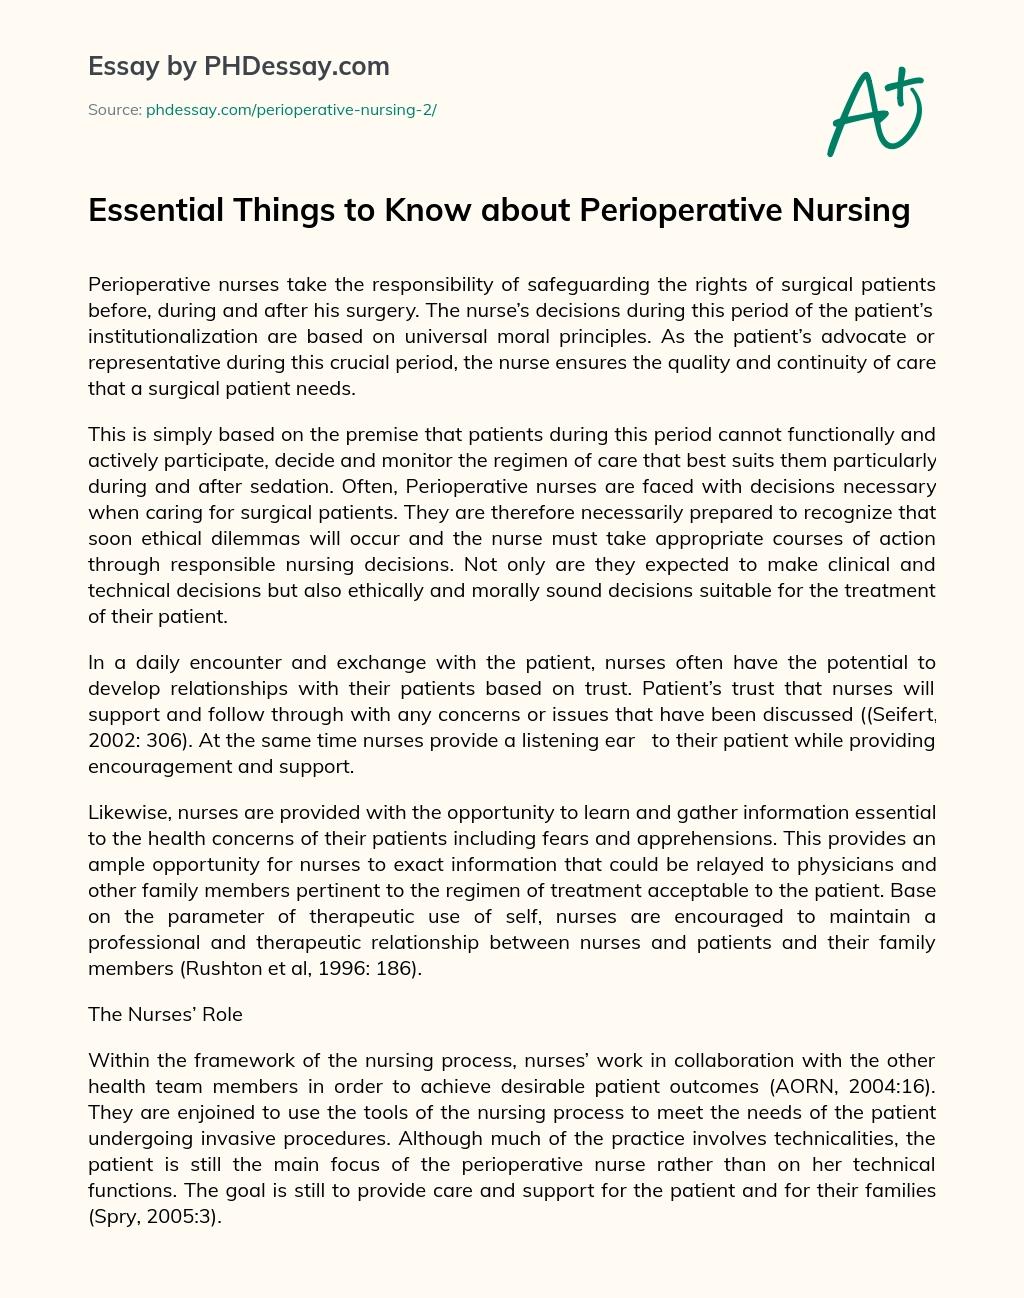 Essential Things to Know about Perioperative Nursing essay